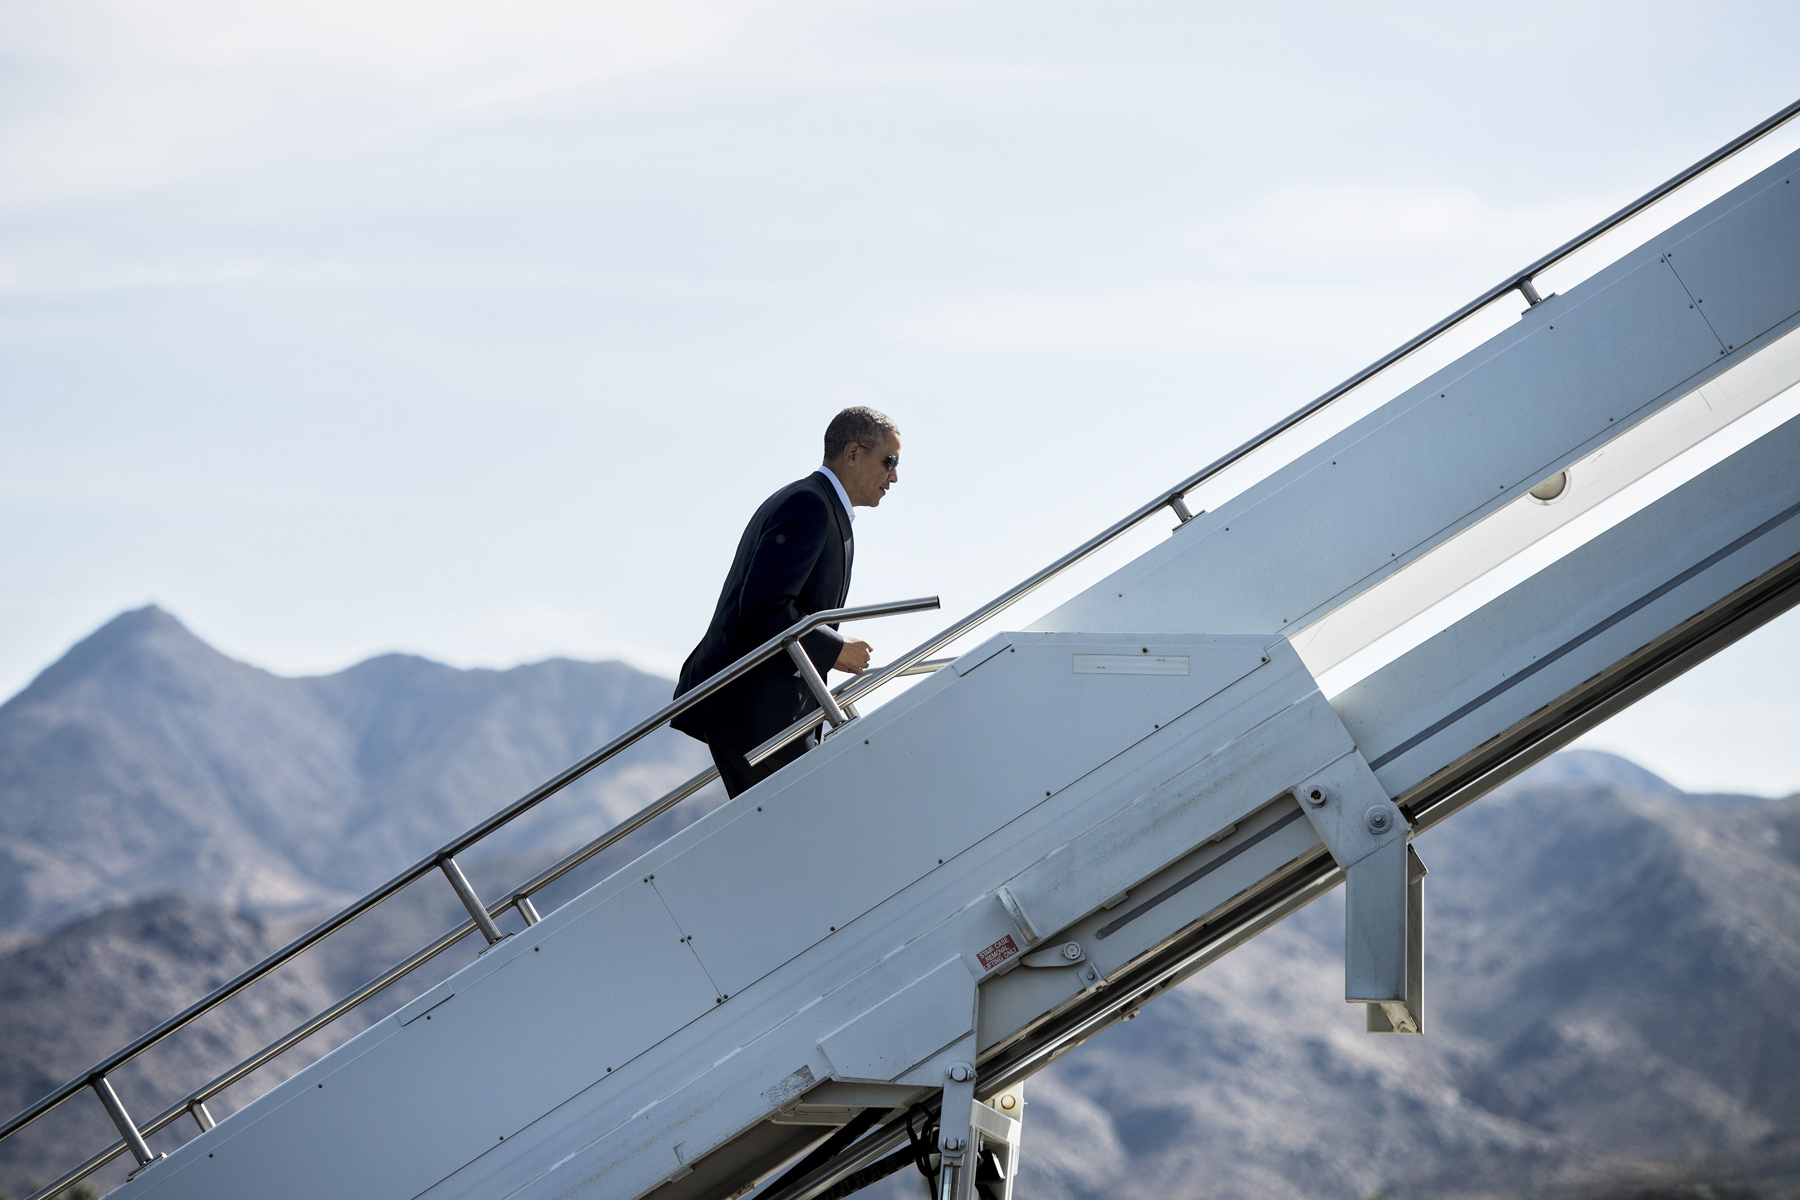 US President Barack Obama boards Air Force One at Palm Springs International Airport, Feb. 17, 2014 in Palm Springs, California. President Obama is returning to Washington,DC after spending the holiday weekend golfing in California. (Brendan Smialowski—AFP/Getty Images)